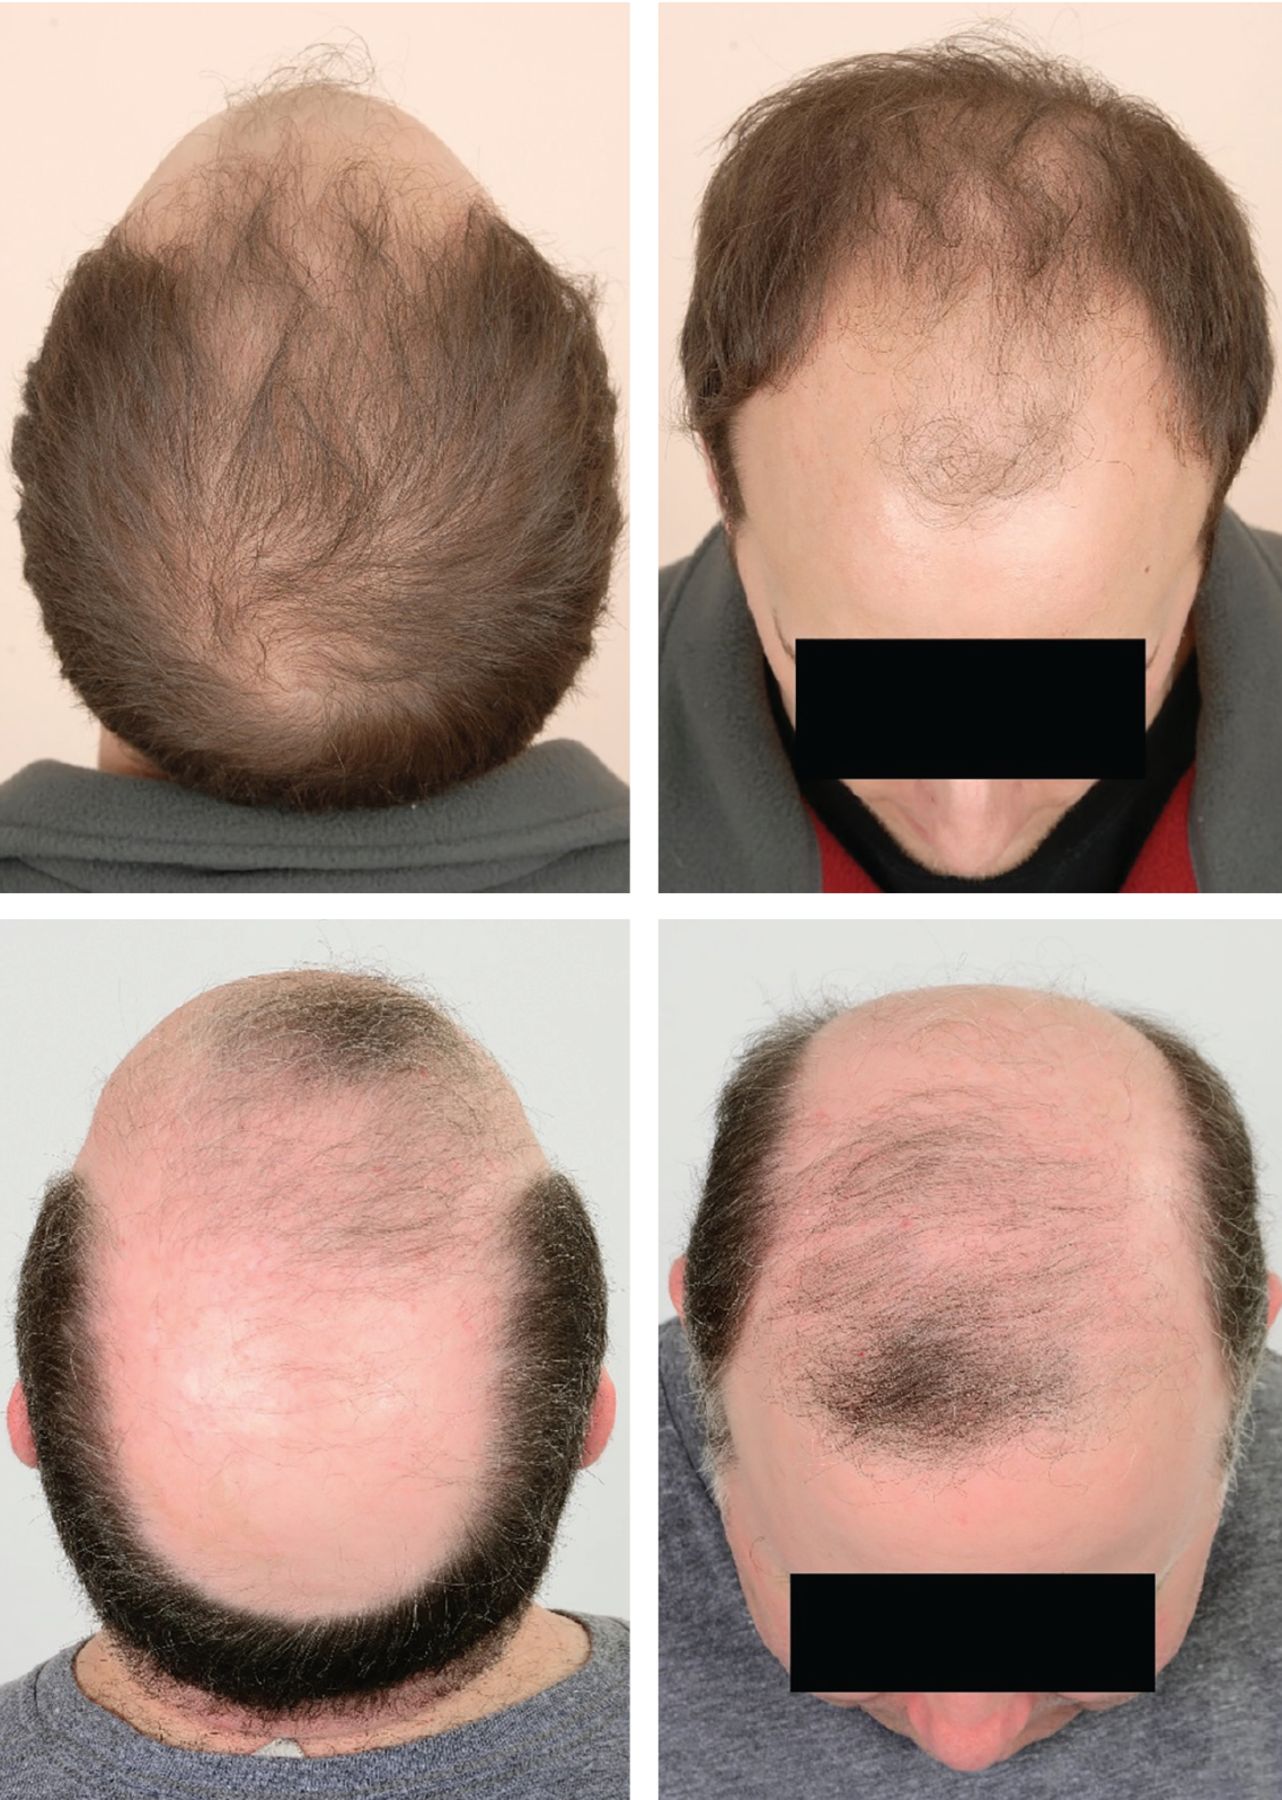 What is male pattern baldness